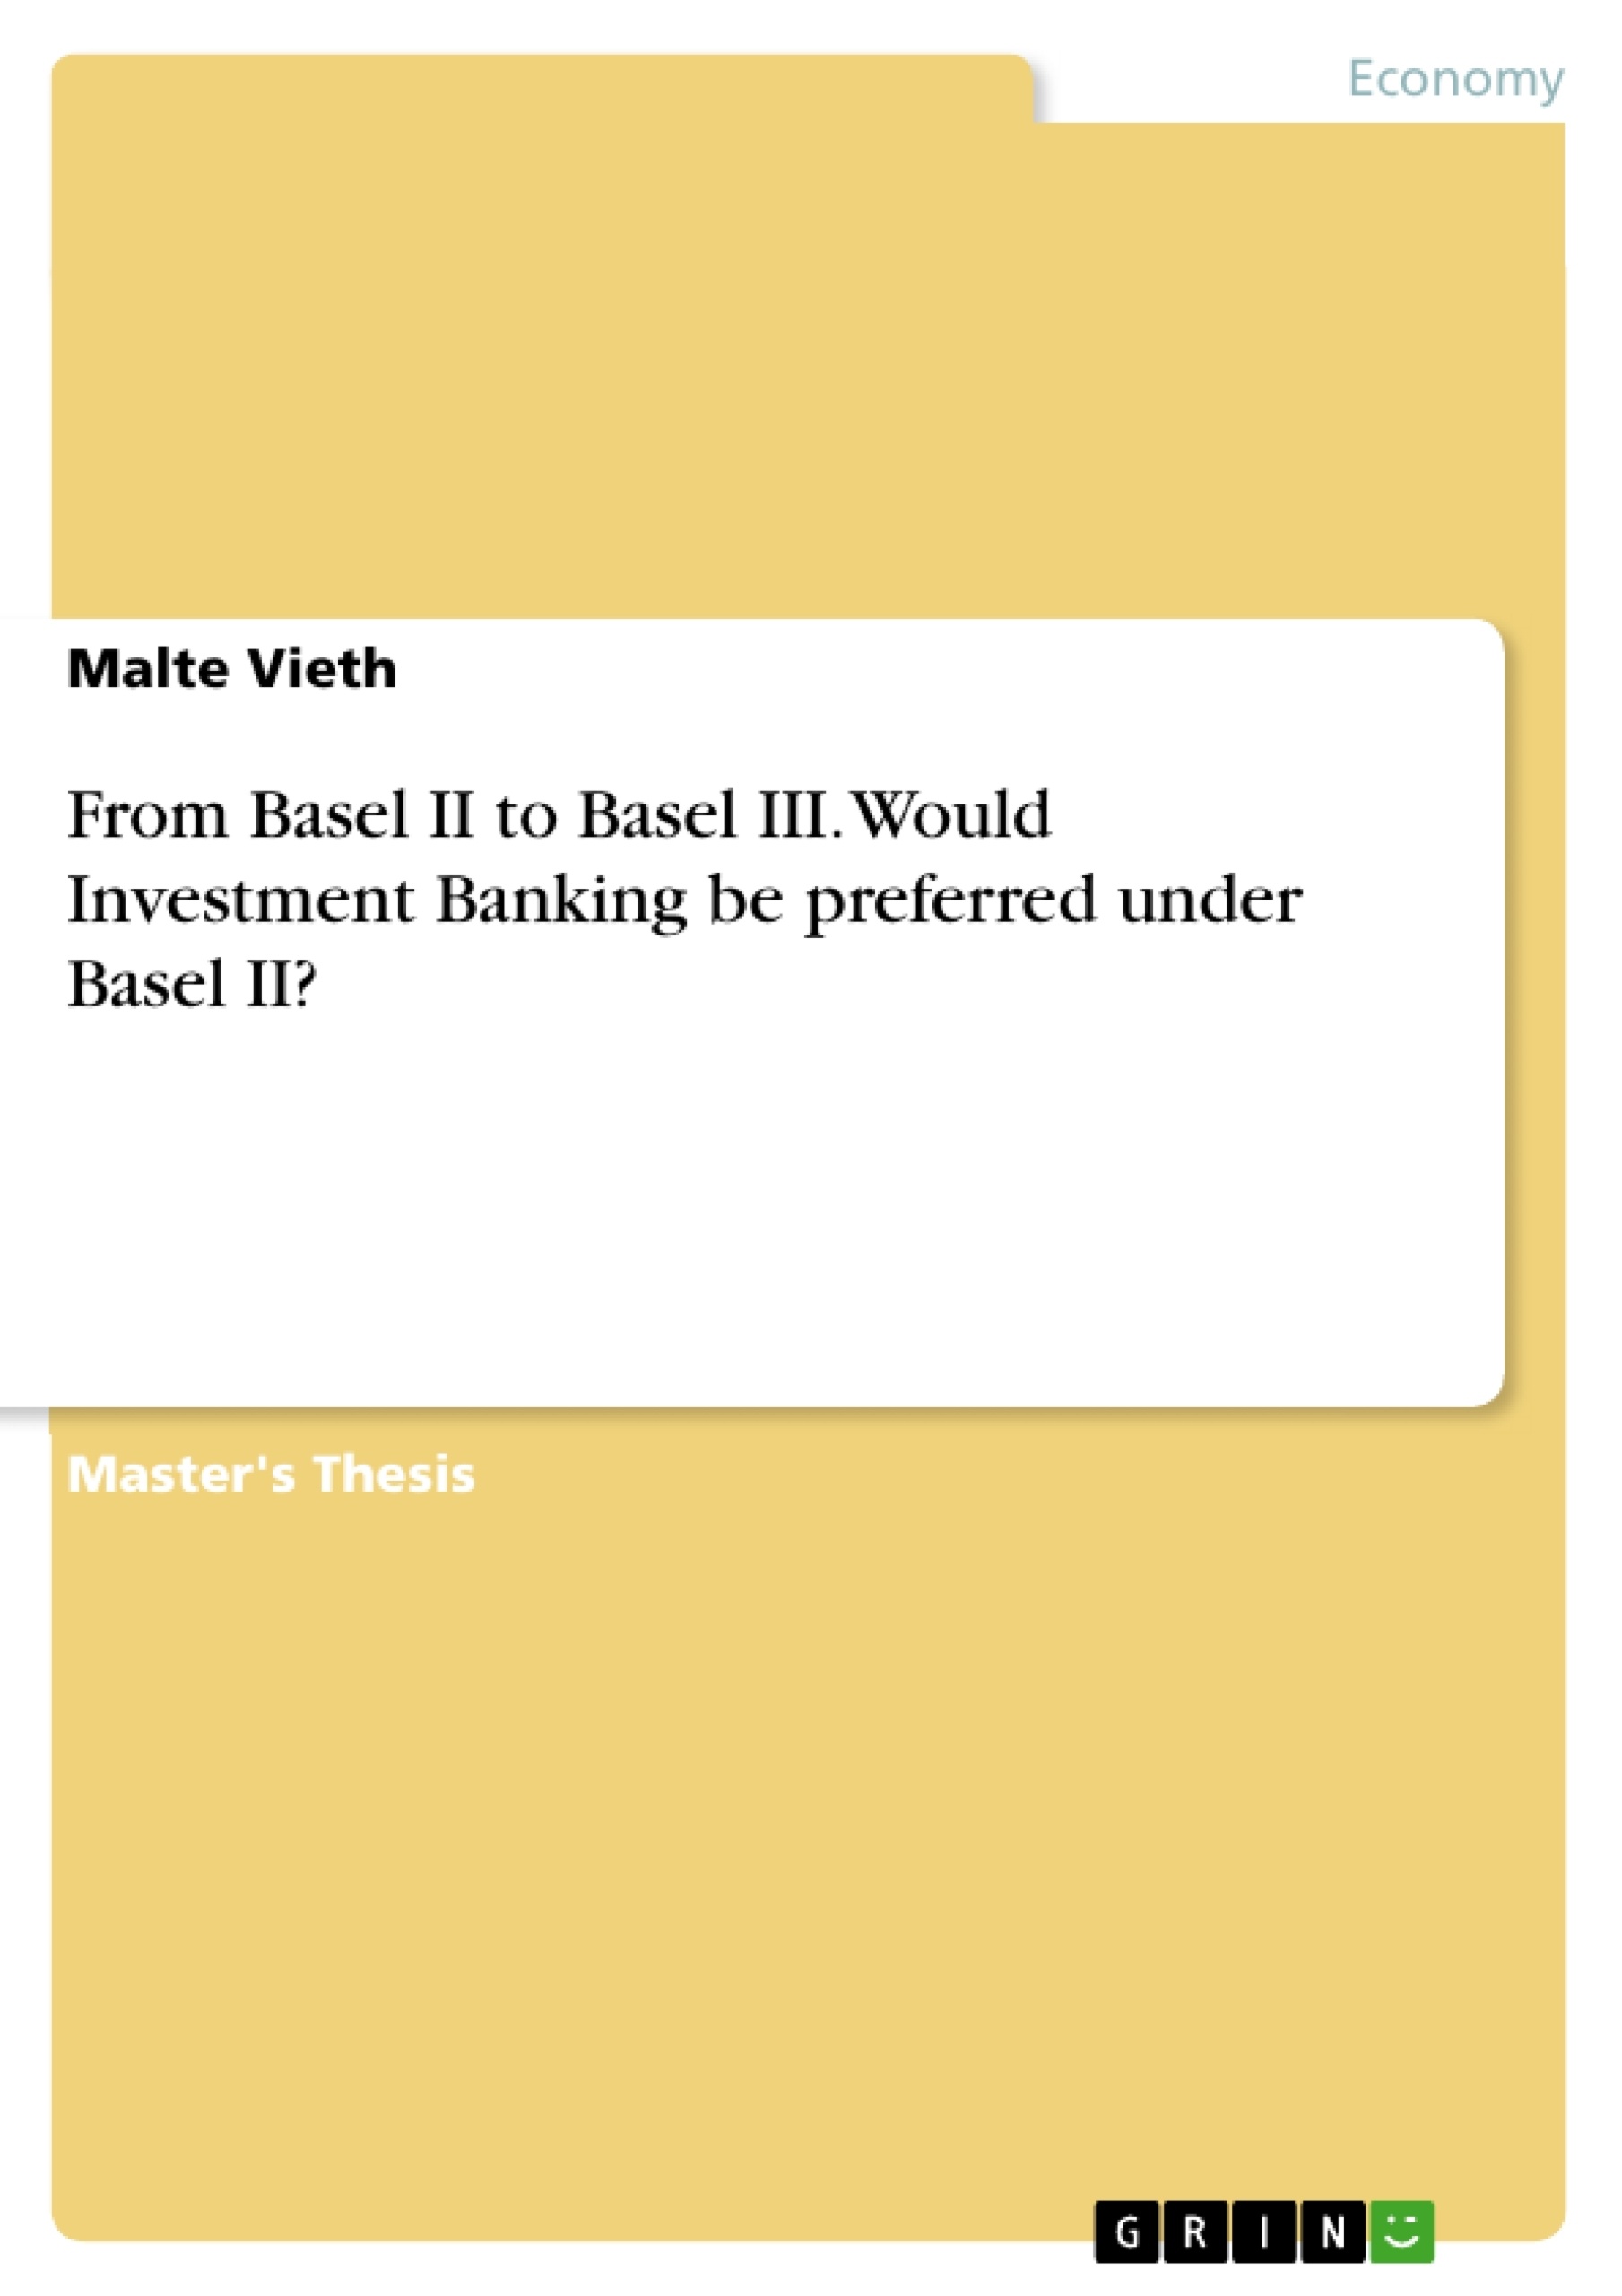 Título: From Basel II to Basel III. Would Investment Banking be preferred under Basel II?